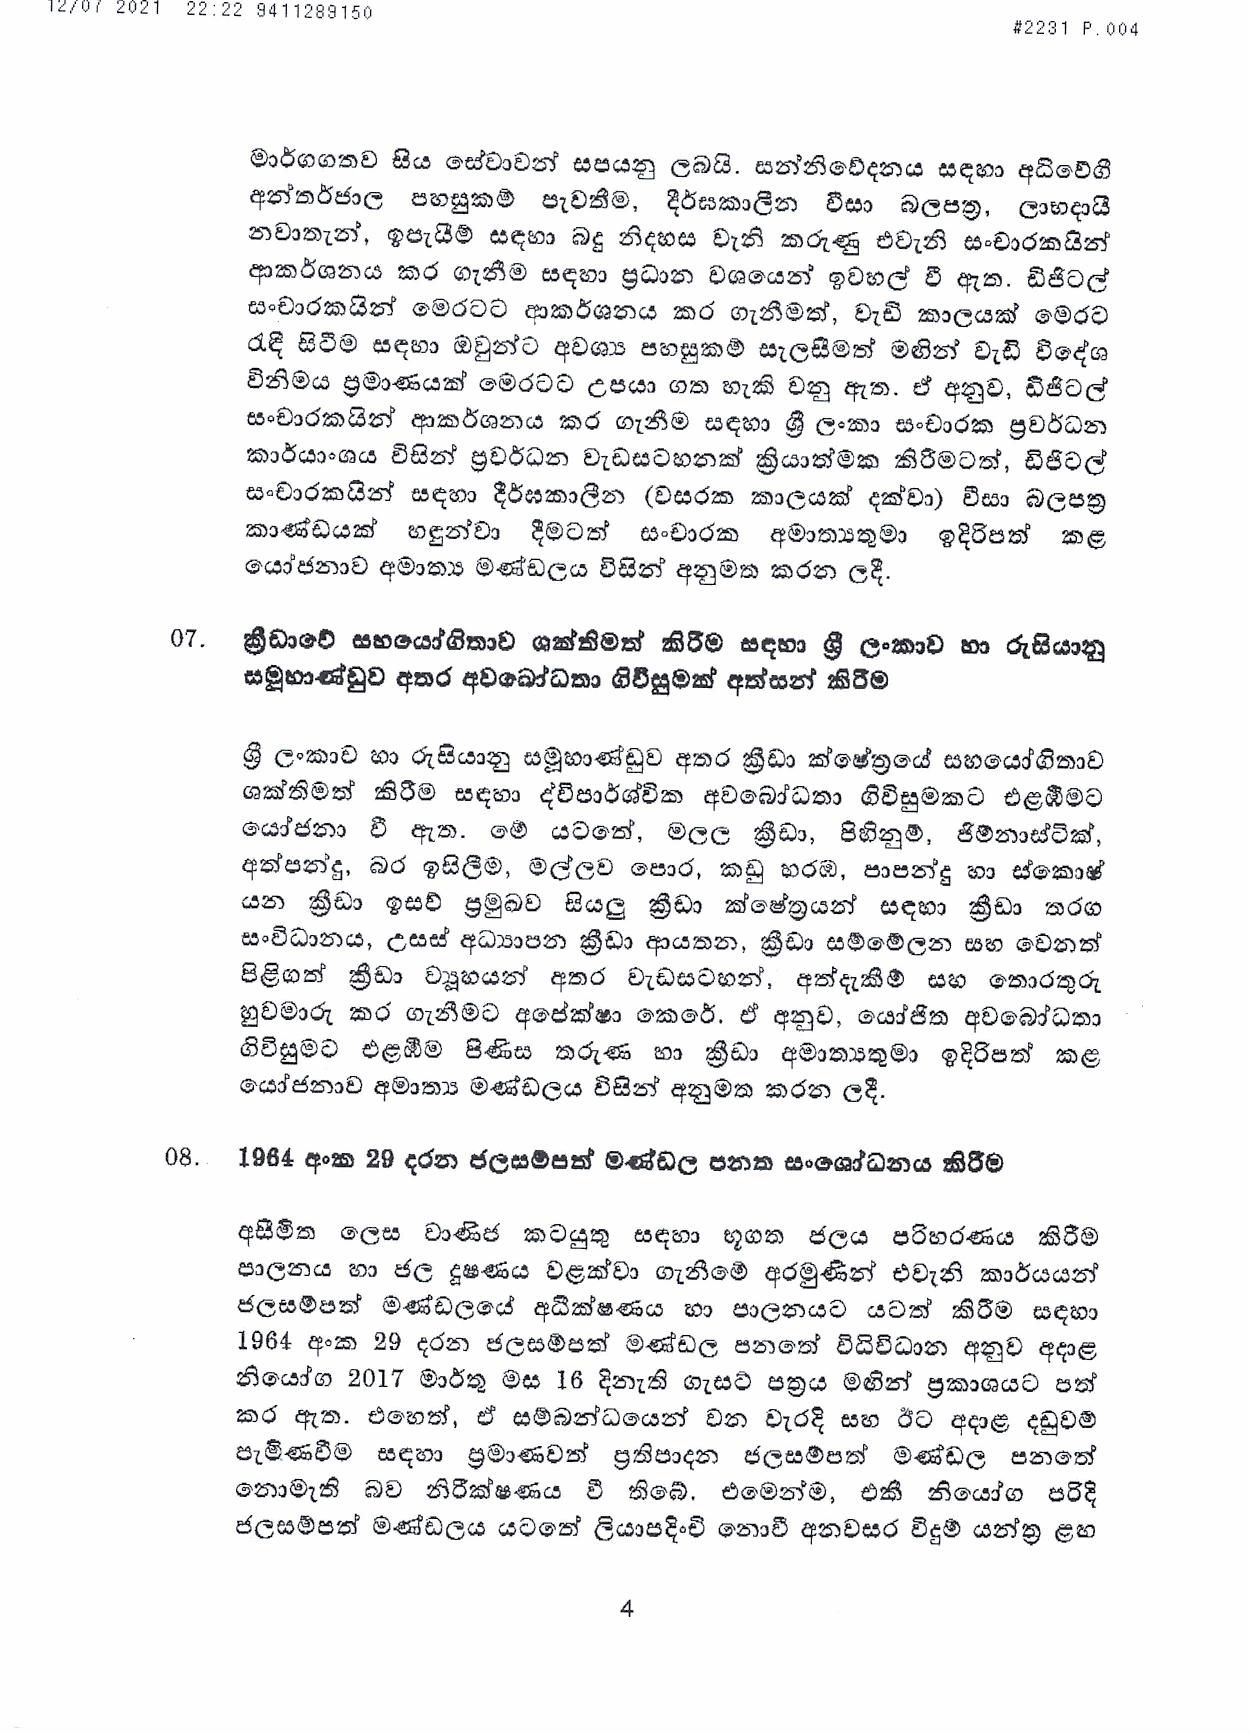 Cabinet Decision on 12.07.2021 page 001